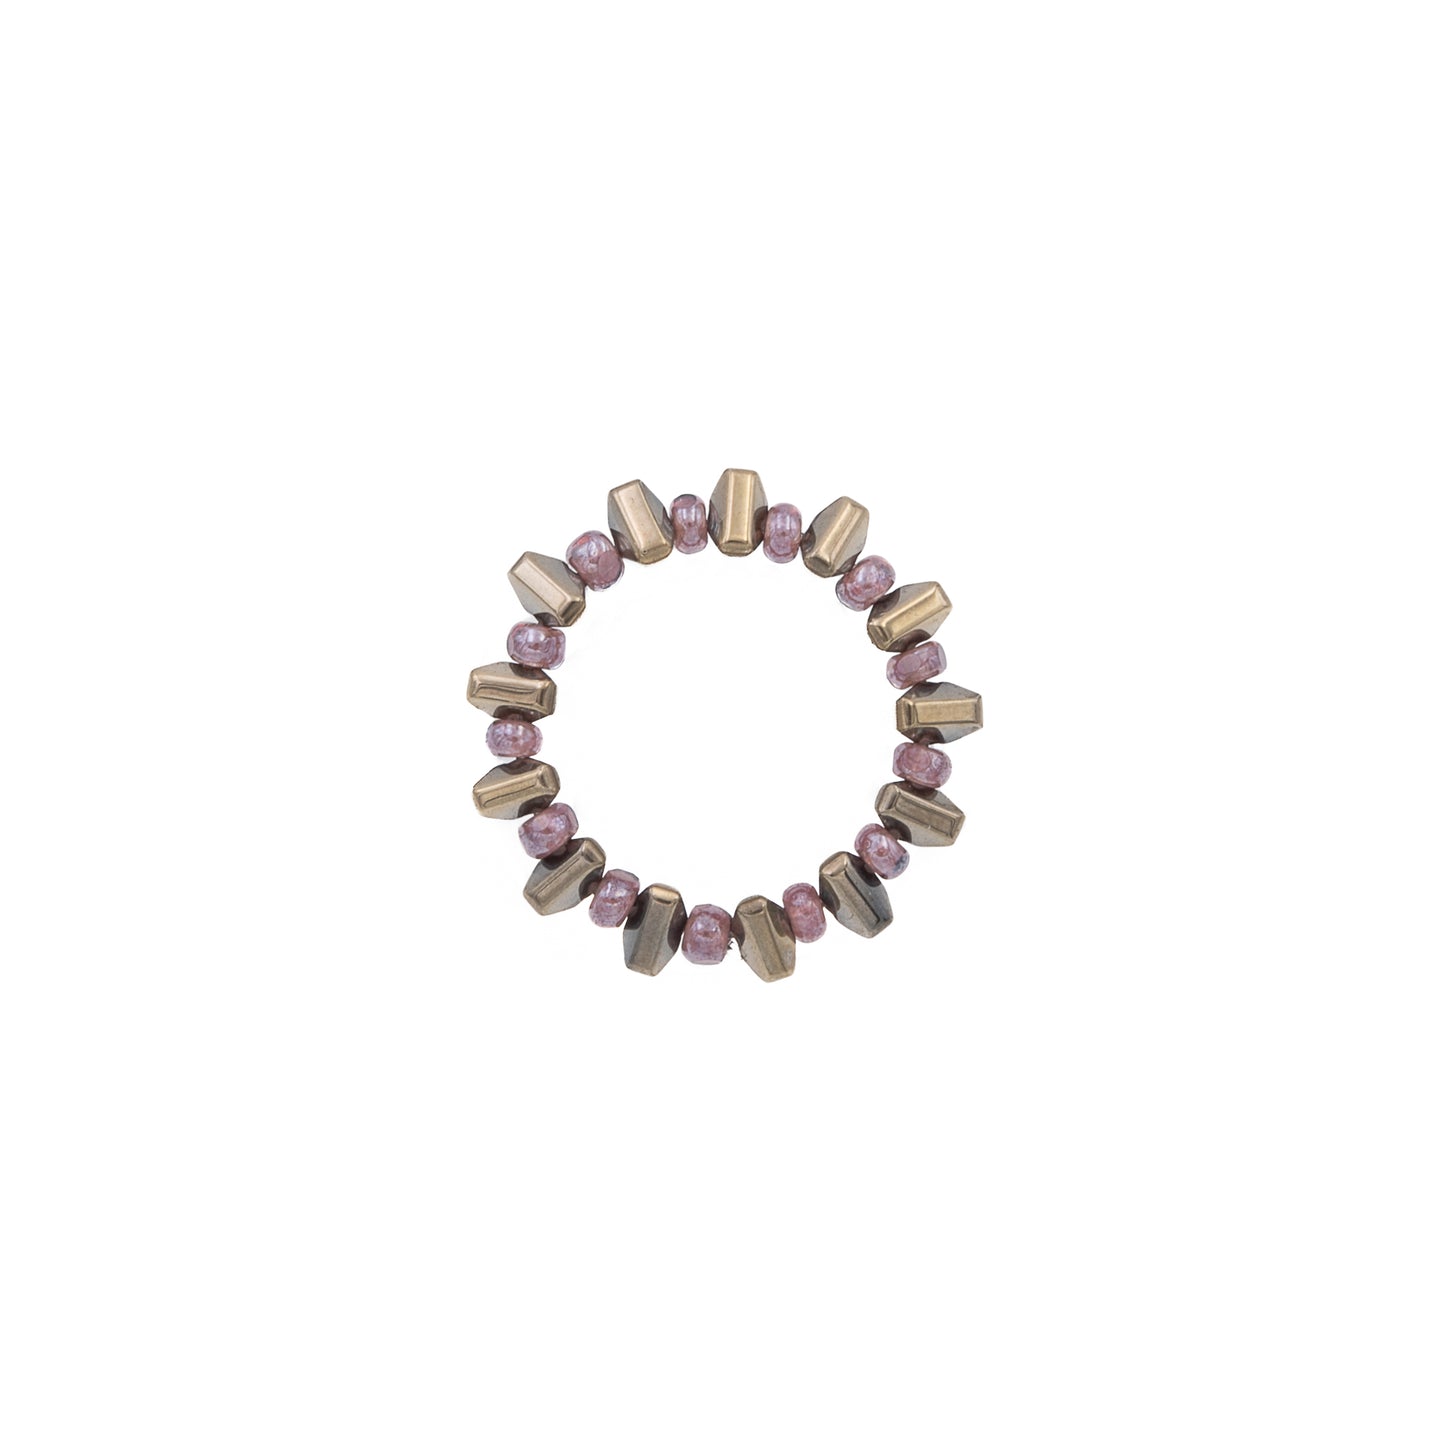 Zurina Ketola Beaded Pyrite Spike Ring in Purple on White Background.